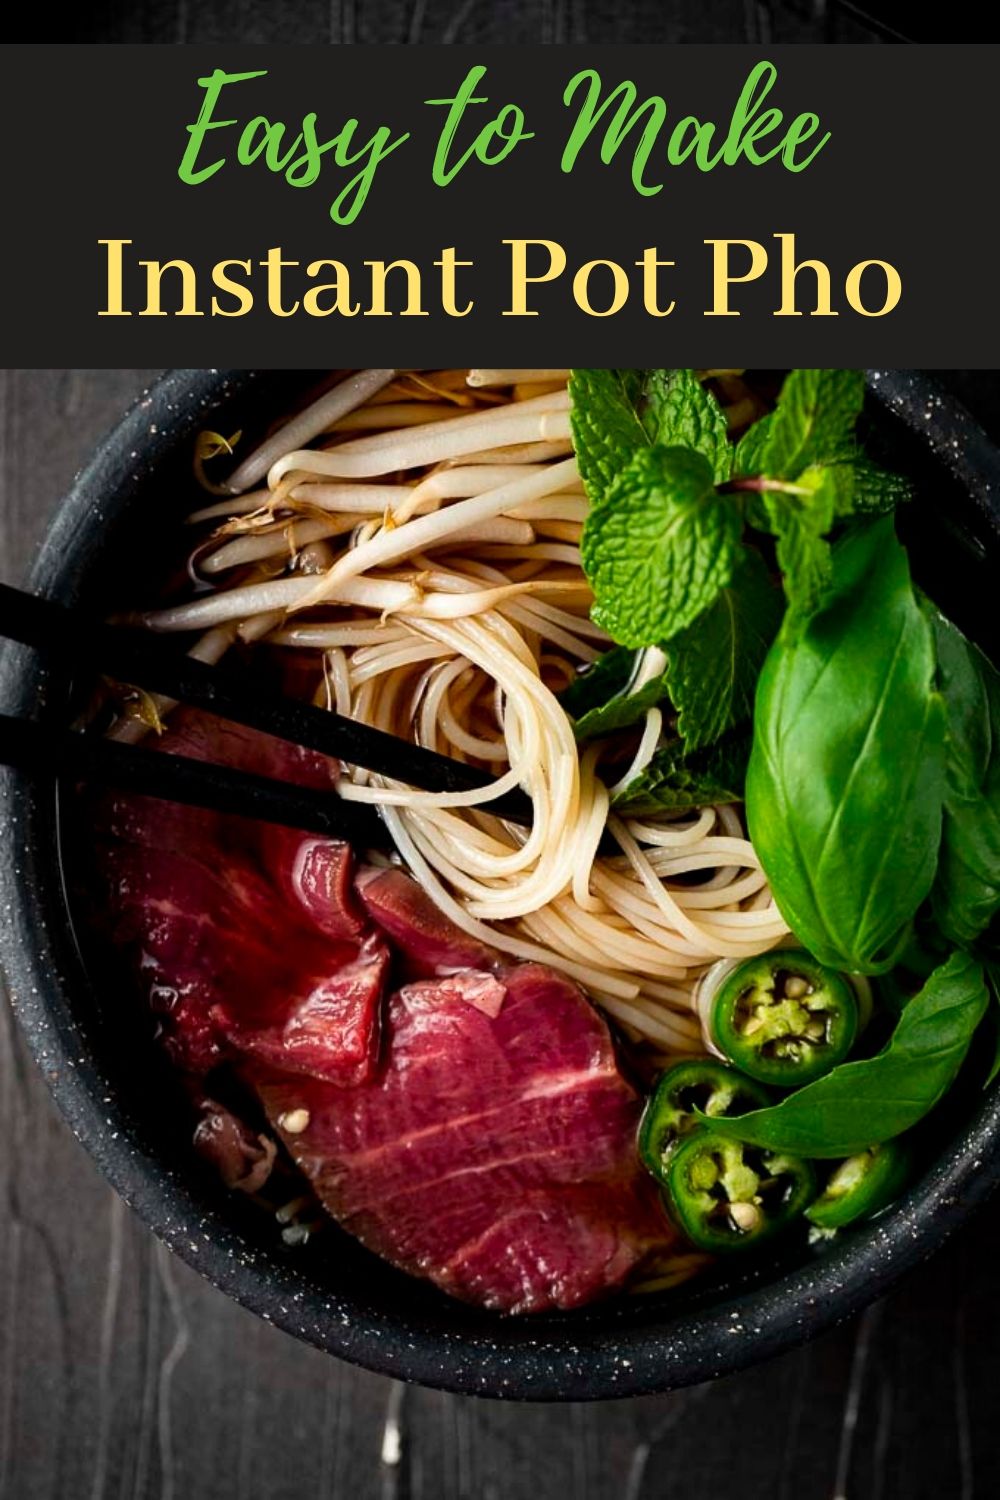 Instant Pot Pho (Beef Pho Recipe) - Went Here 8 This